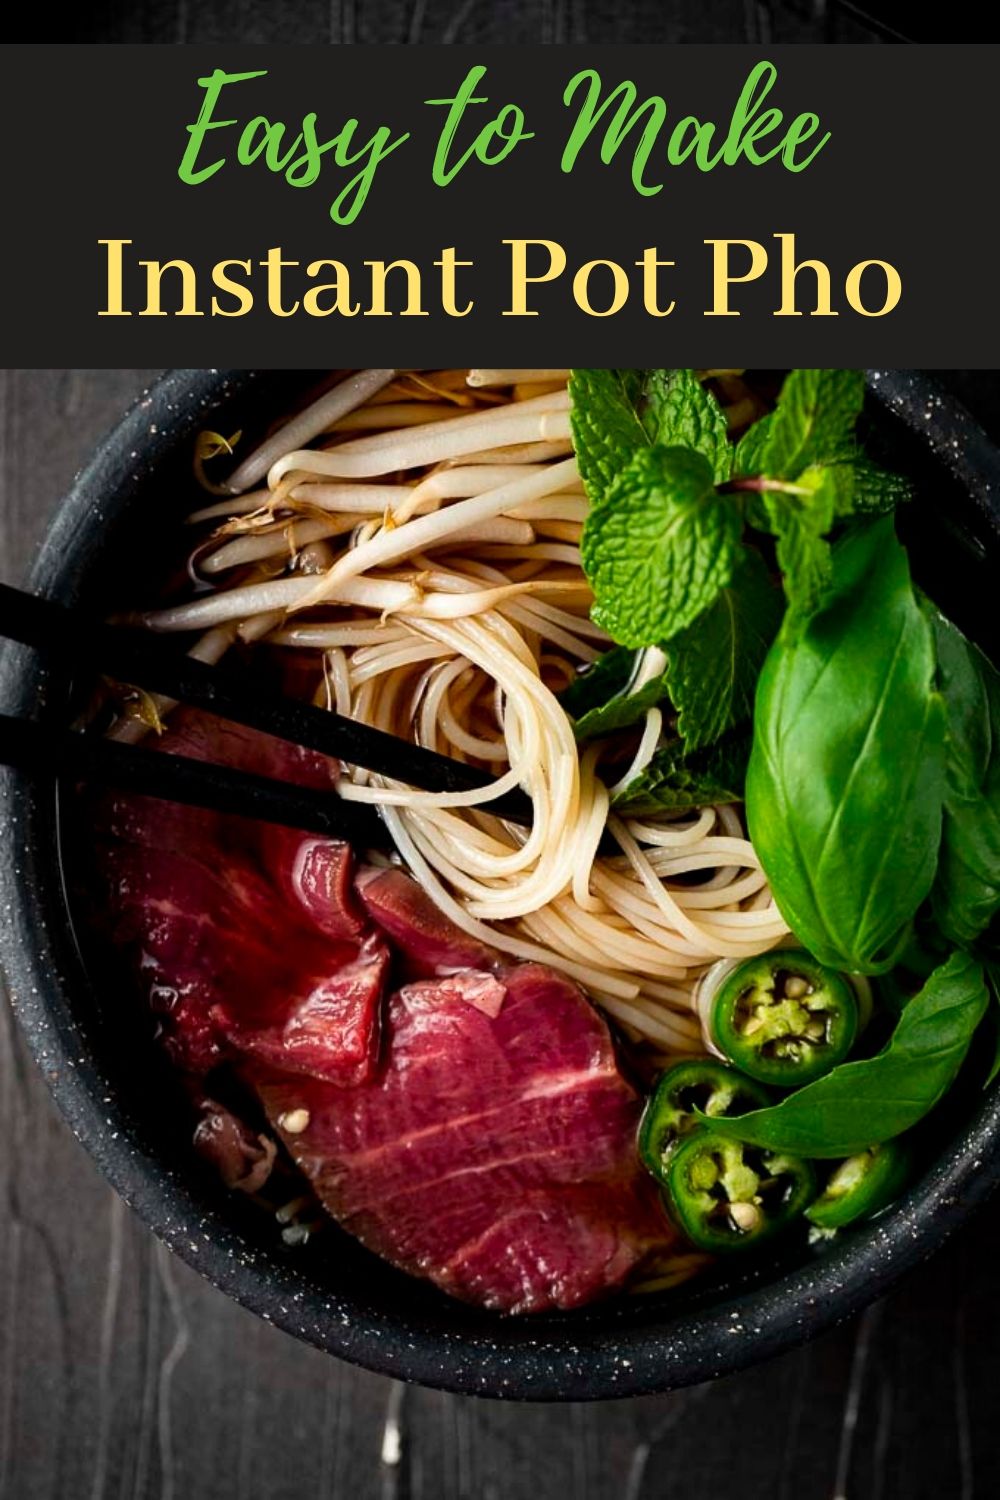 Instant Pot Pho (Beef Pho Recipe) - Went Here 8 This